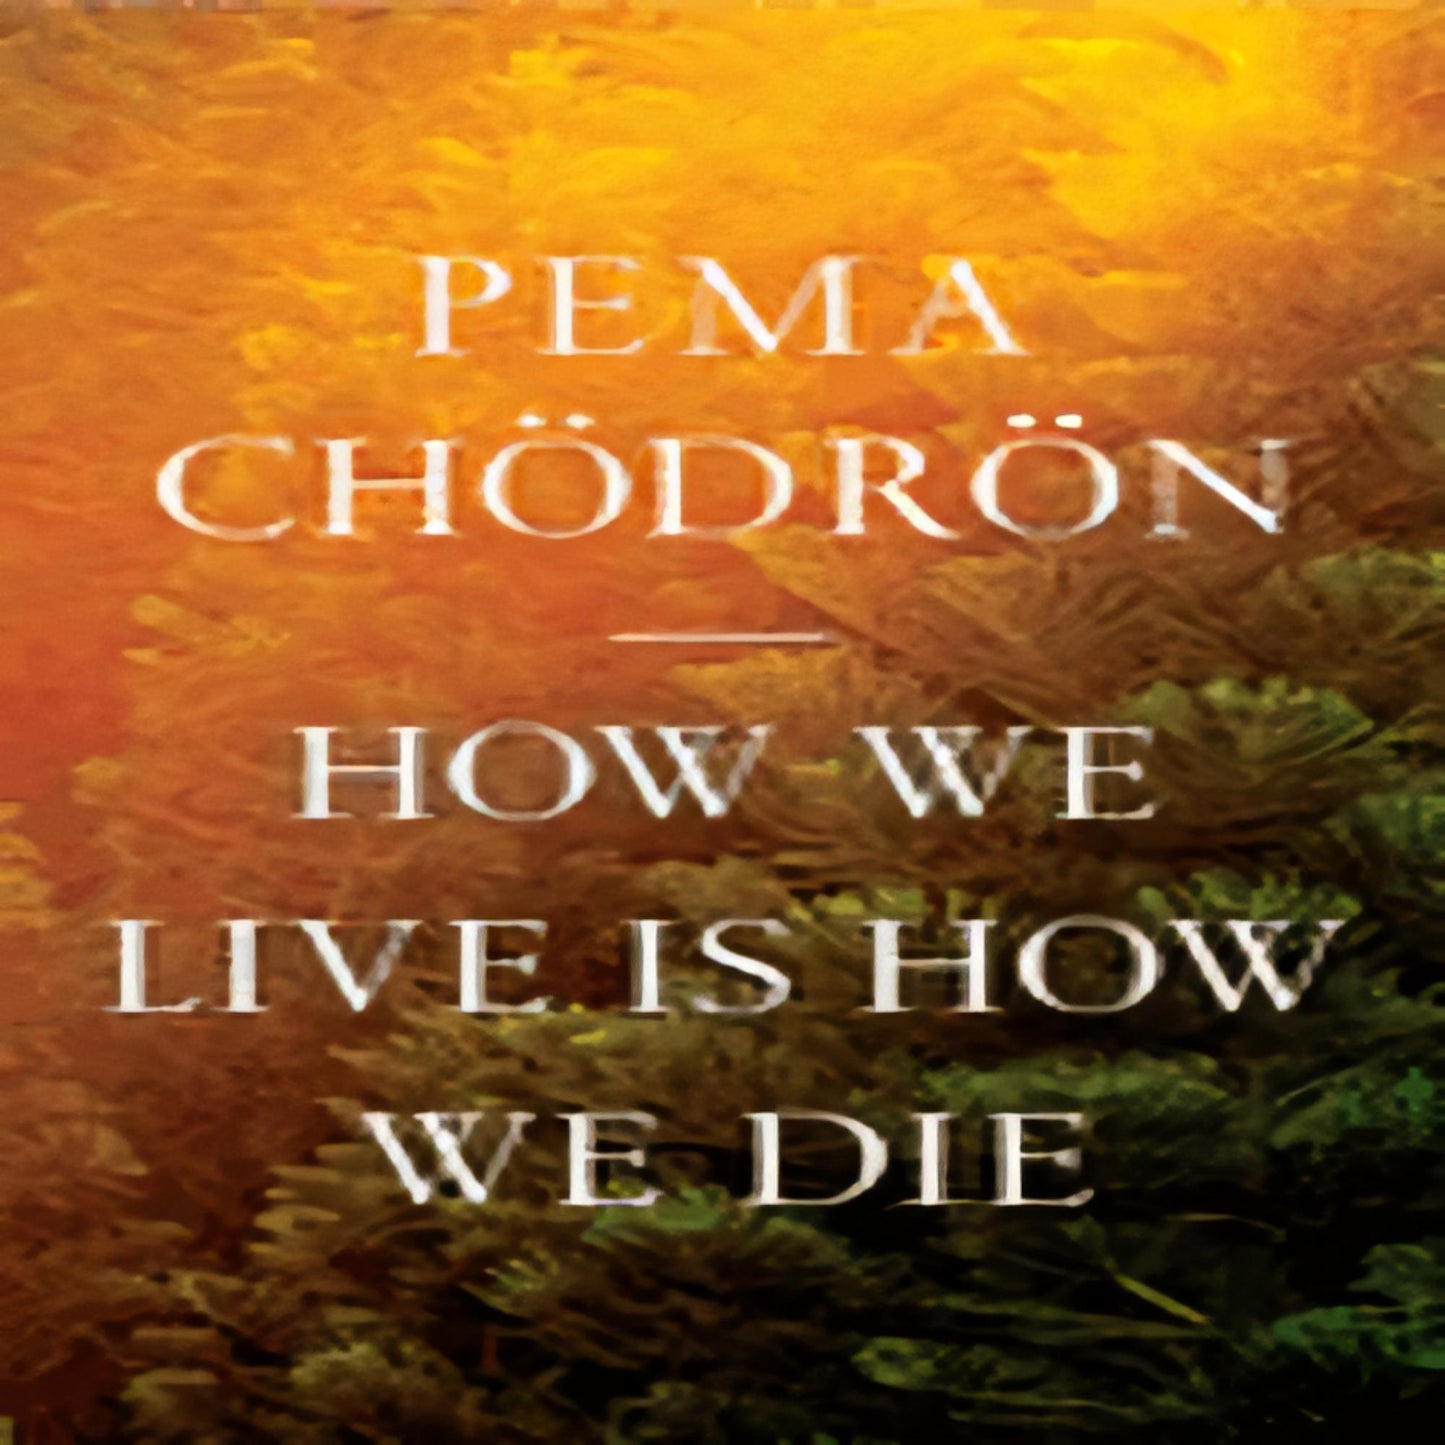 How We Live Is How We Die99-021923-161180924XDPGBOOKSTORE.COM. Today's Bestsellers.